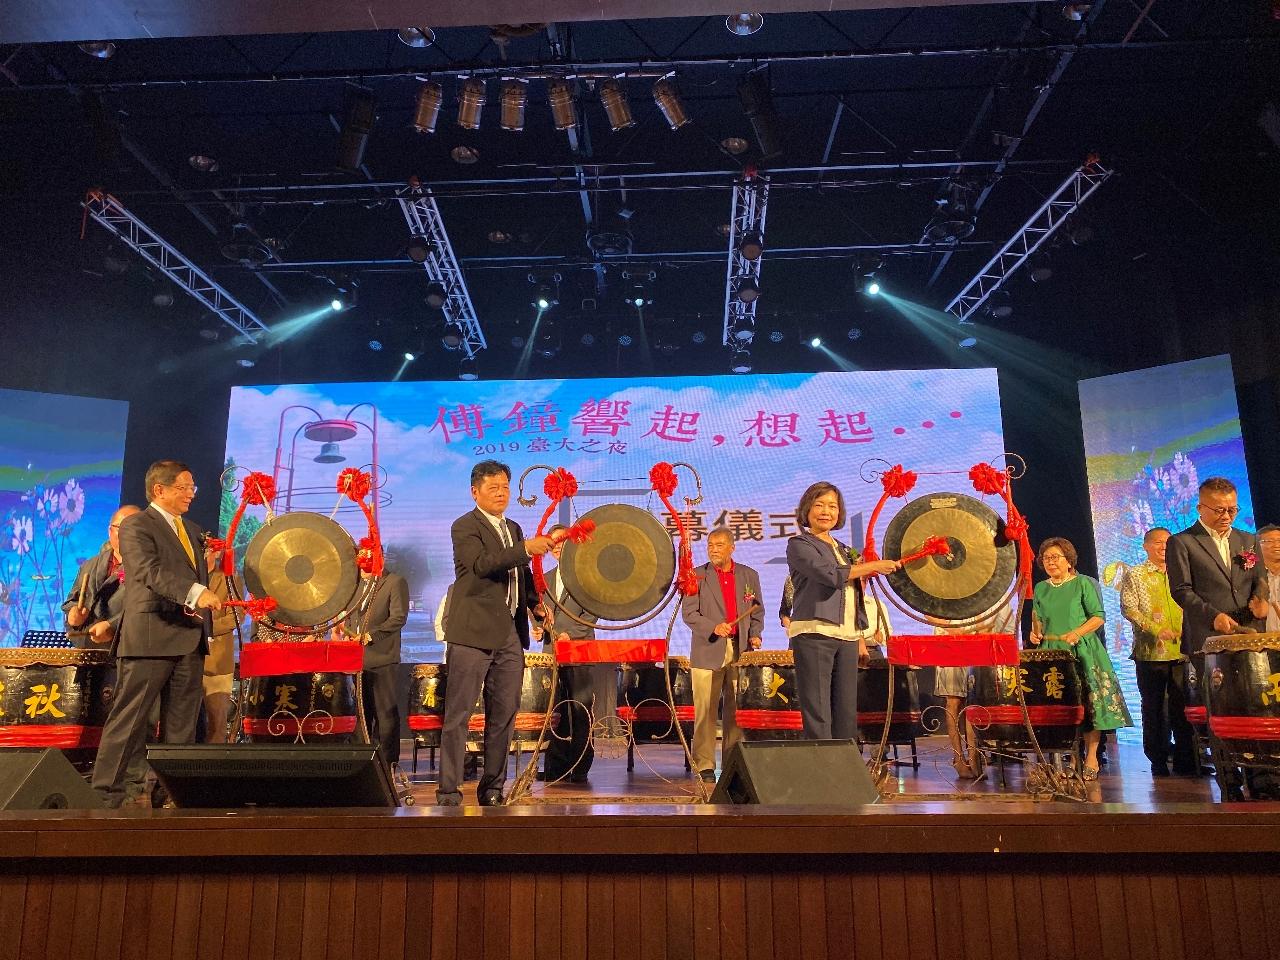 Representative Anne Hung (second from right) attends the 2019 dinner opening ceremony hosted by Alumni Association of National Taiwan University, Malaysia.